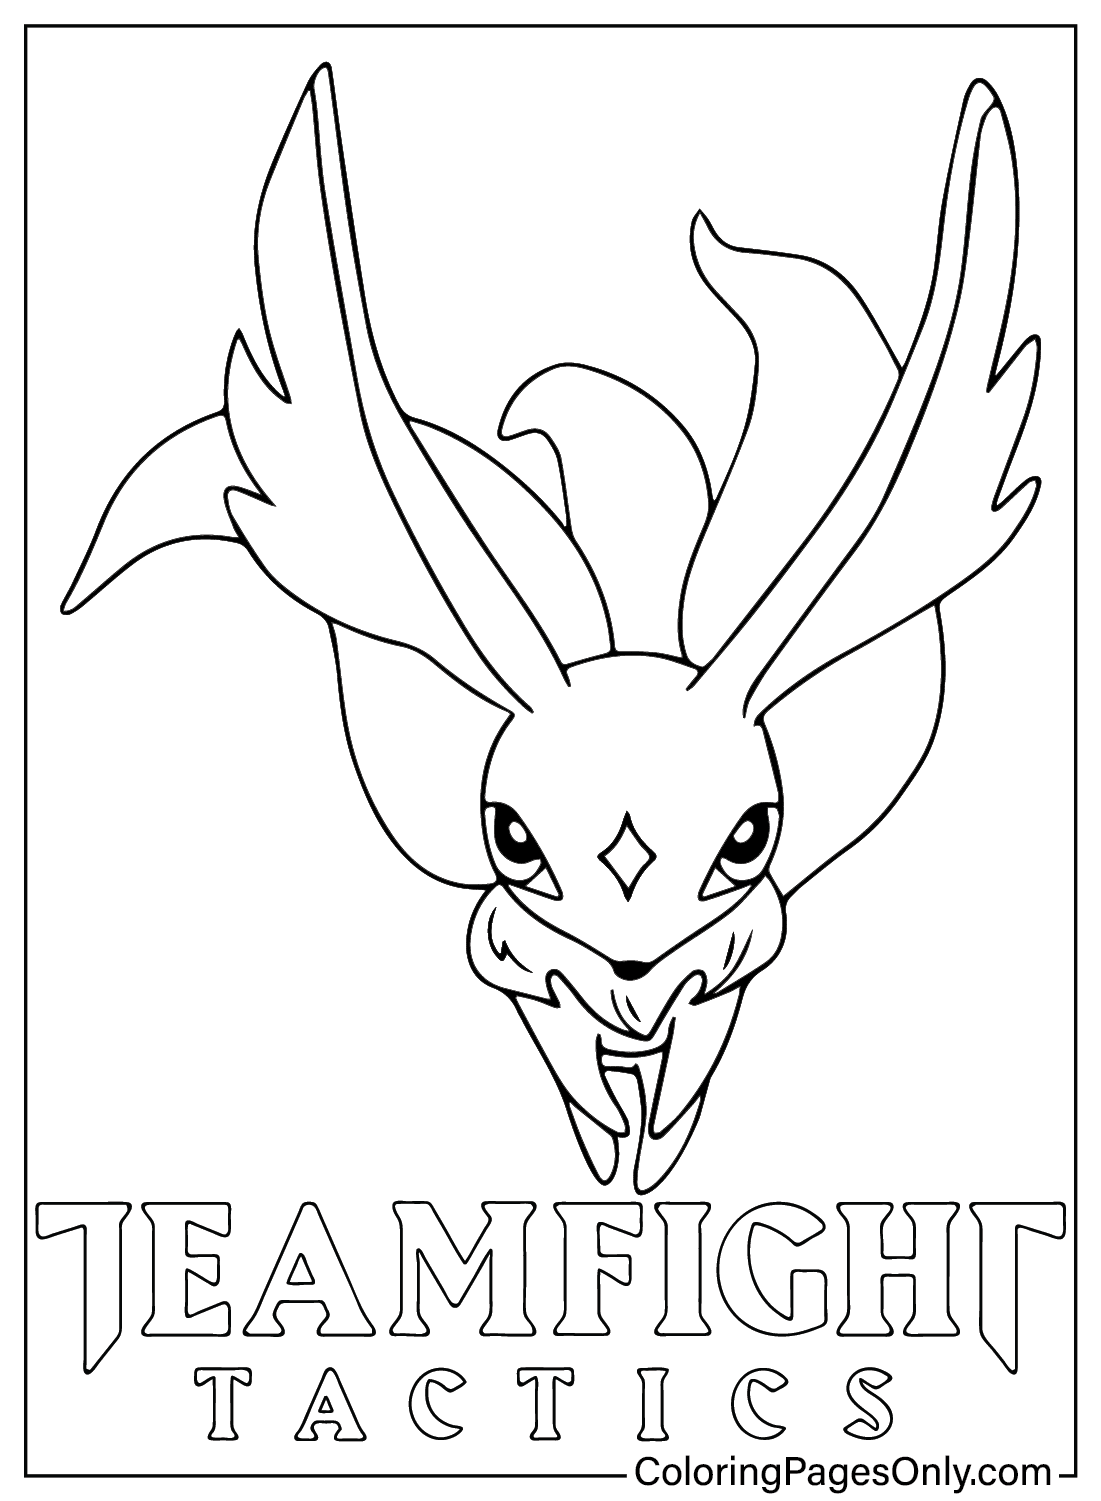 Hushtail Teamfight Tactics Coloring Page from Teamfight Tactics